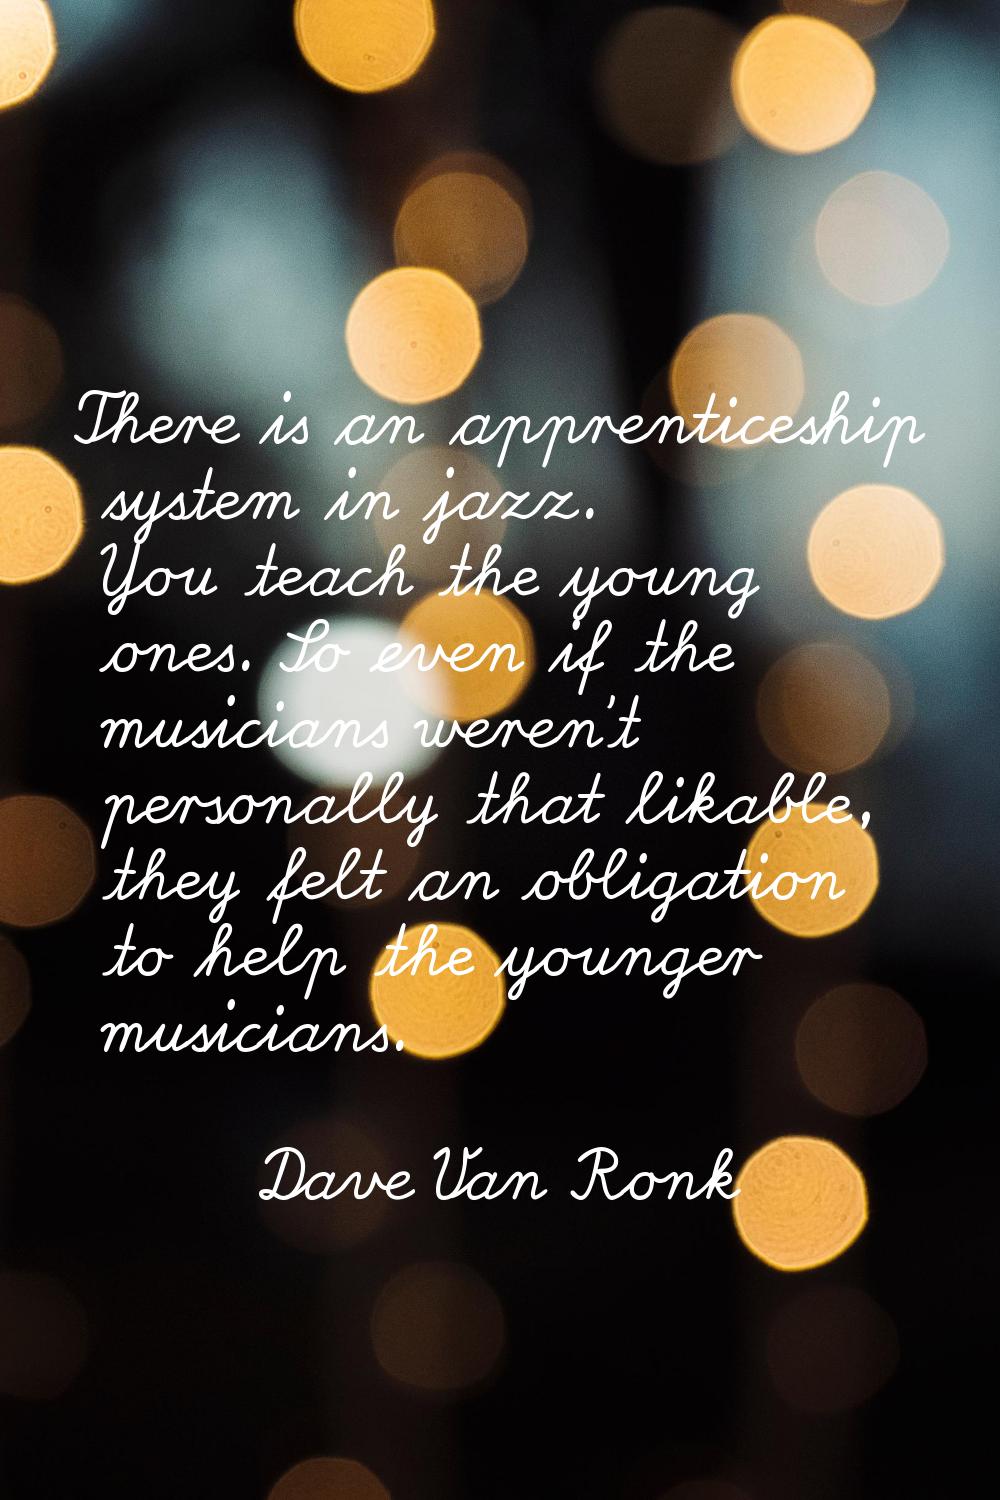 There is an apprenticeship system in jazz. You teach the young ones. So even if the musicians weren